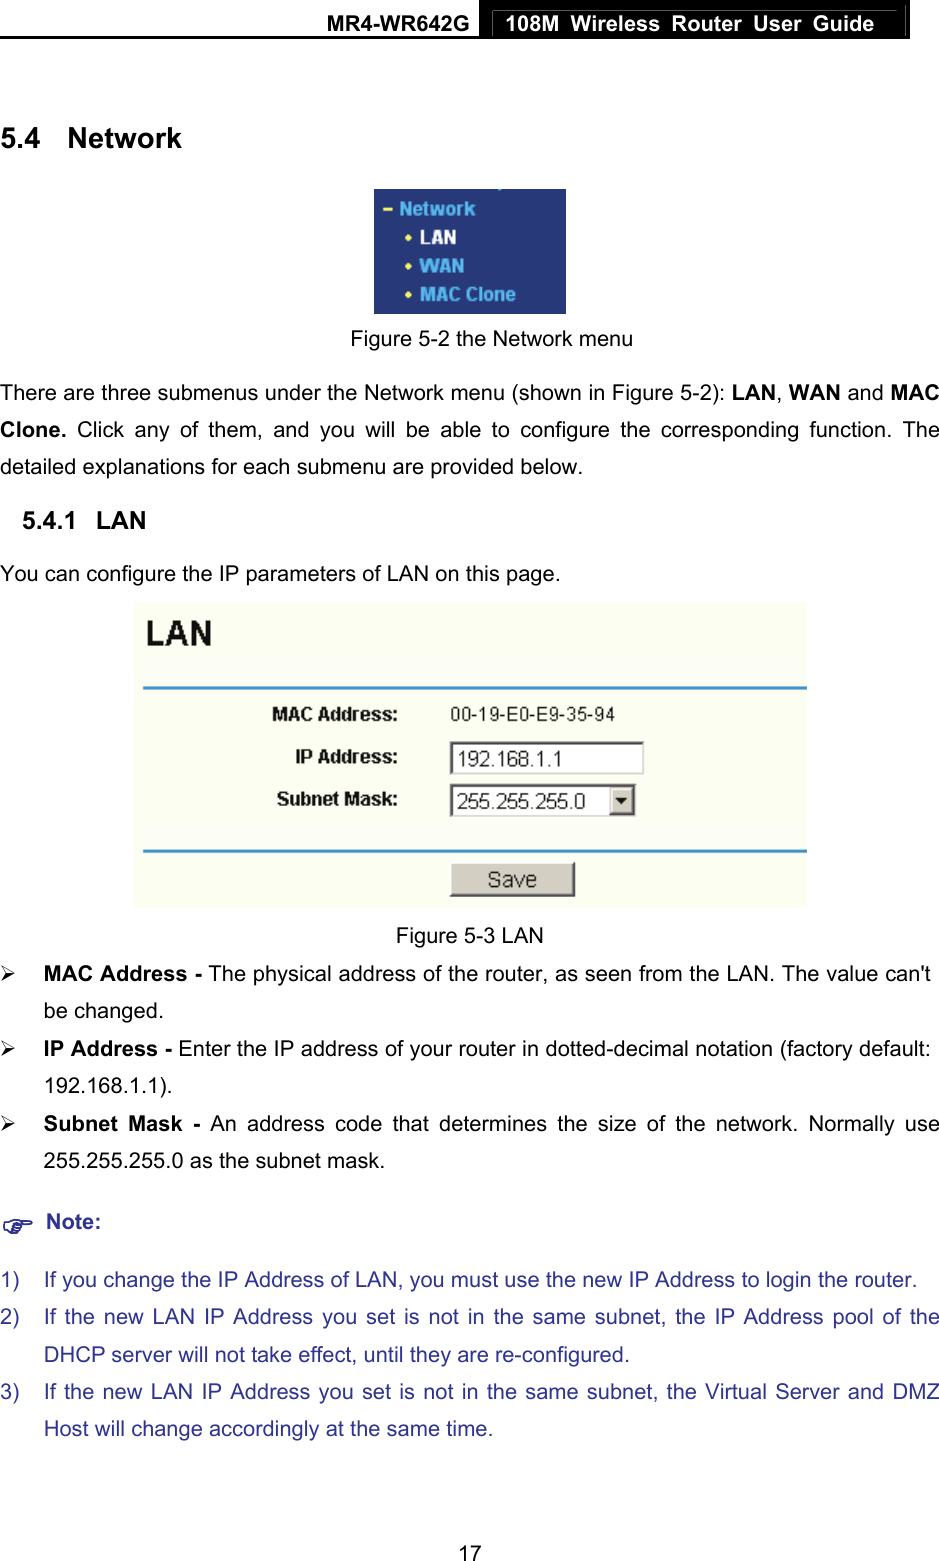 MR4-WR642G 108M Wireless Router User Guide   17 5.4  Network    Figure 5-2 the Network menu There are three submenus under the Network menu (shown in Figure 5-2): LAN, WAN and MAC Clone.  Click any of them, and you will be able to configure the corresponding function. The detailed explanations for each submenu are provided below. 5.4.1  LAN You can configure the IP parameters of LAN on this page.    Figure 5-3 LAN ¾ MAC Address - The physical address of the router, as seen from the LAN. The value can&apos;t be changed. ¾ IP Address - Enter the IP address of your router in dotted-decimal notation (factory default: 192.168.1.1). ¾ Subnet Mask - An address code that determines the size of the network. Normally use 255.255.255.0 as the subnet mask.   ) Note: 1)  If you change the IP Address of LAN, you must use the new IP Address to login the router.   2)  If the new LAN IP Address you set is not in the same subnet, the IP Address pool of the DHCP server will not take effect, until they are re-configured. 3)  If the new LAN IP Address you set is not in the same subnet, the Virtual Server and DMZ Host will change accordingly at the same time. 